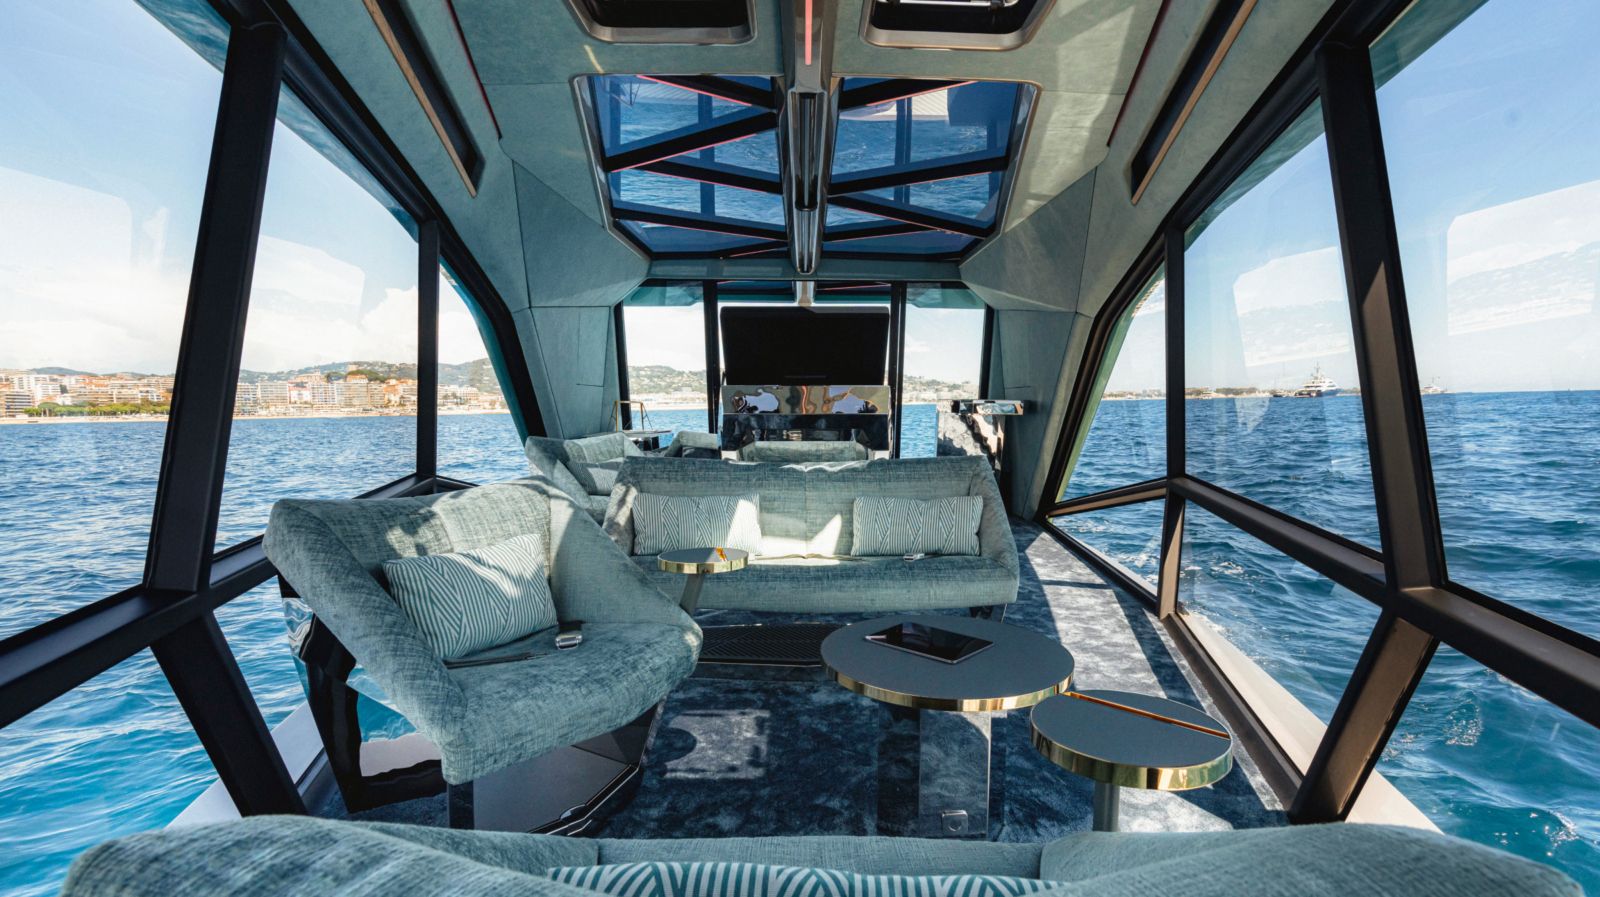 Interior of THE ICON showing ocean views and seating configuration.